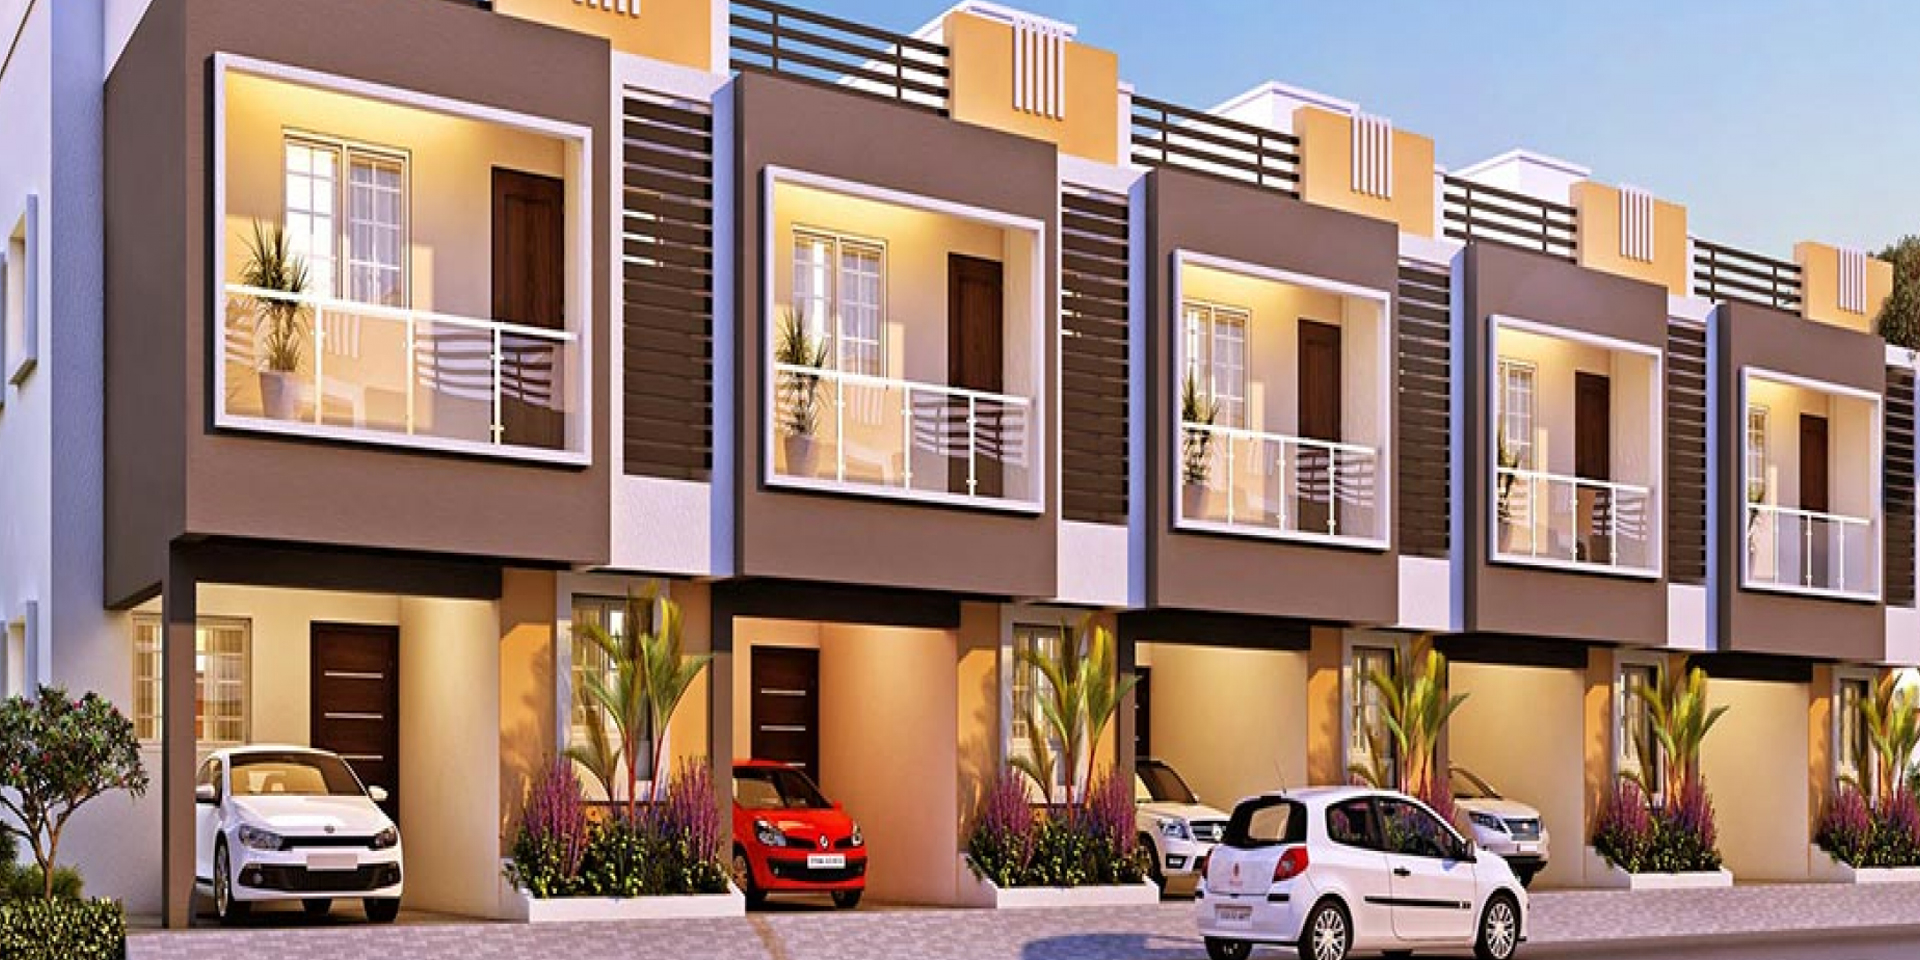 3 BHK House for sale in Thandalam